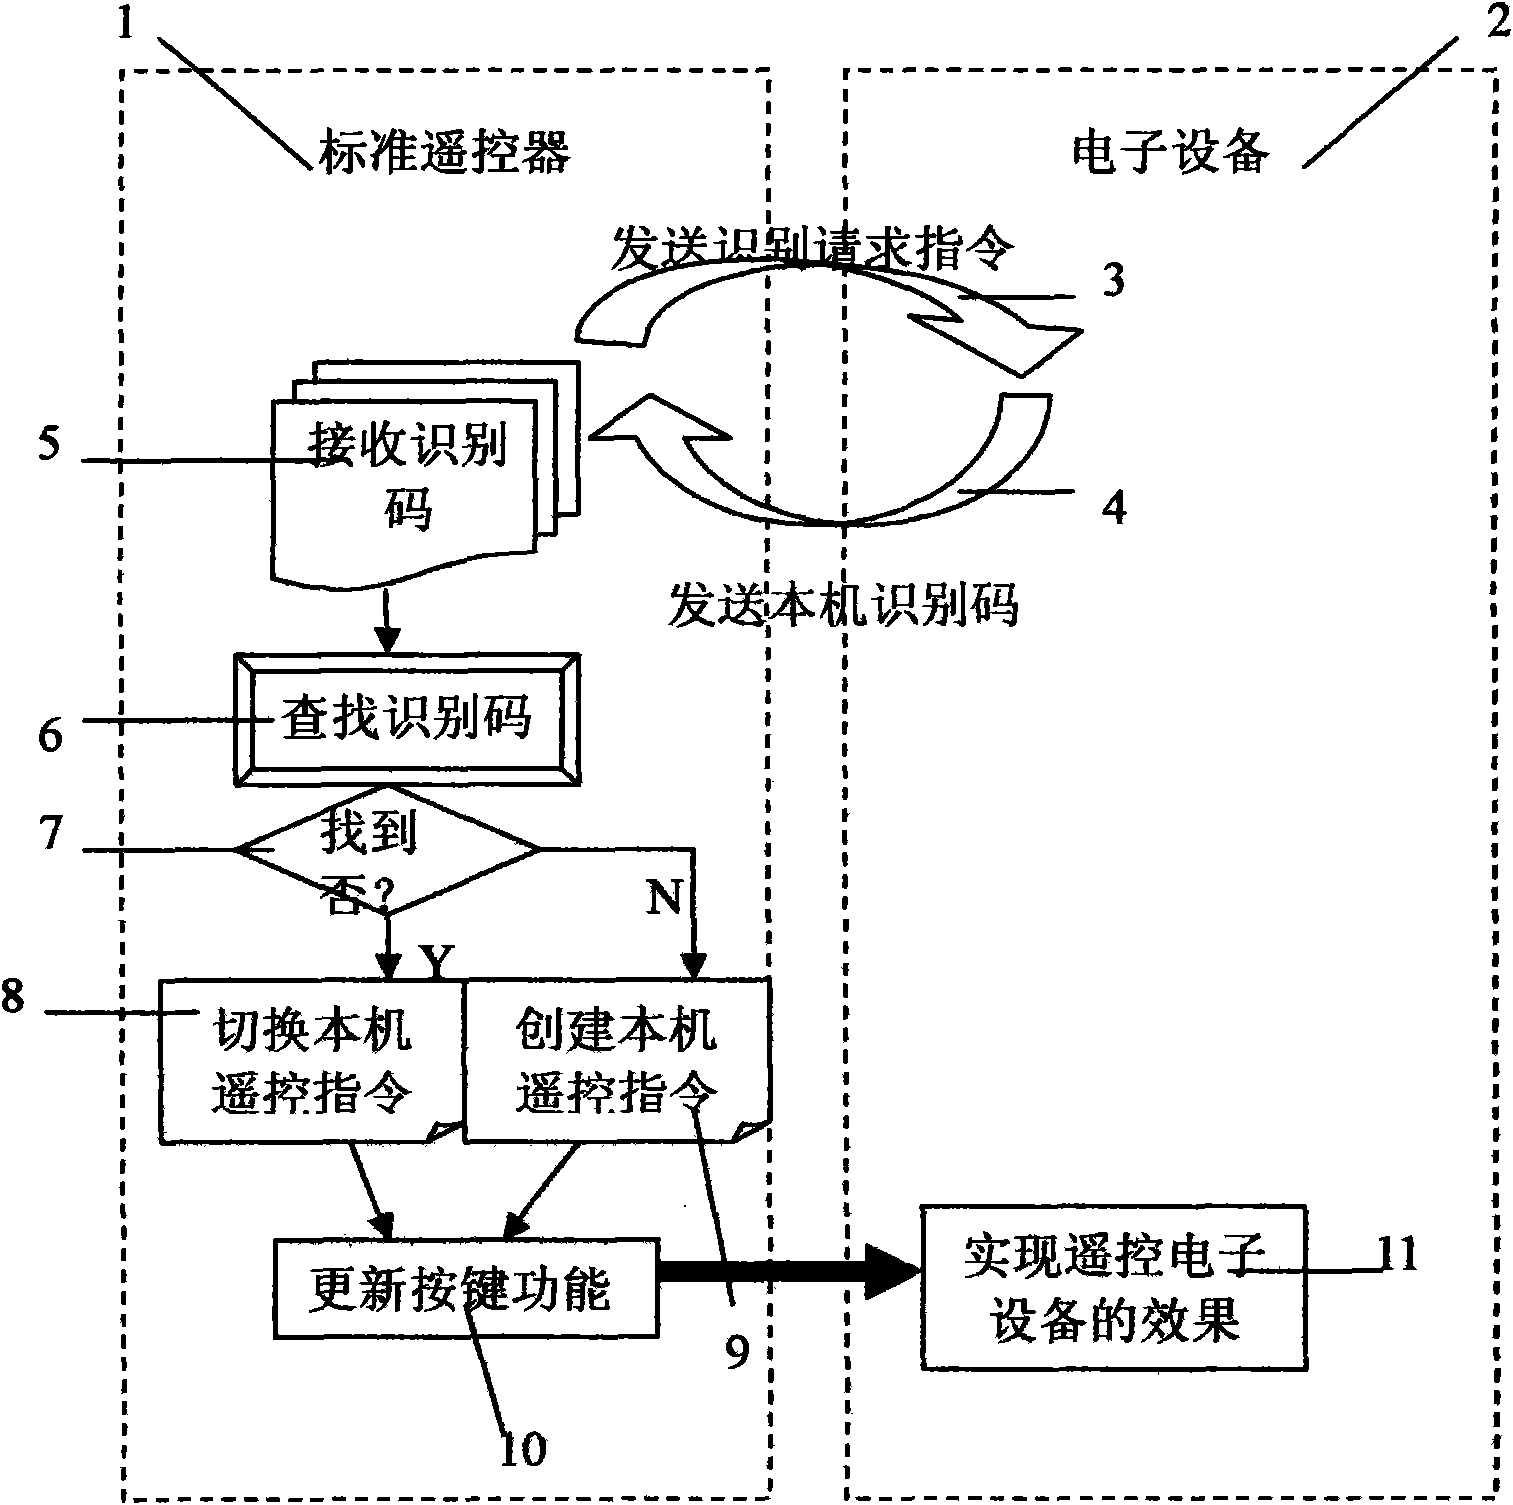 Generation method for remote control of electronic equipment